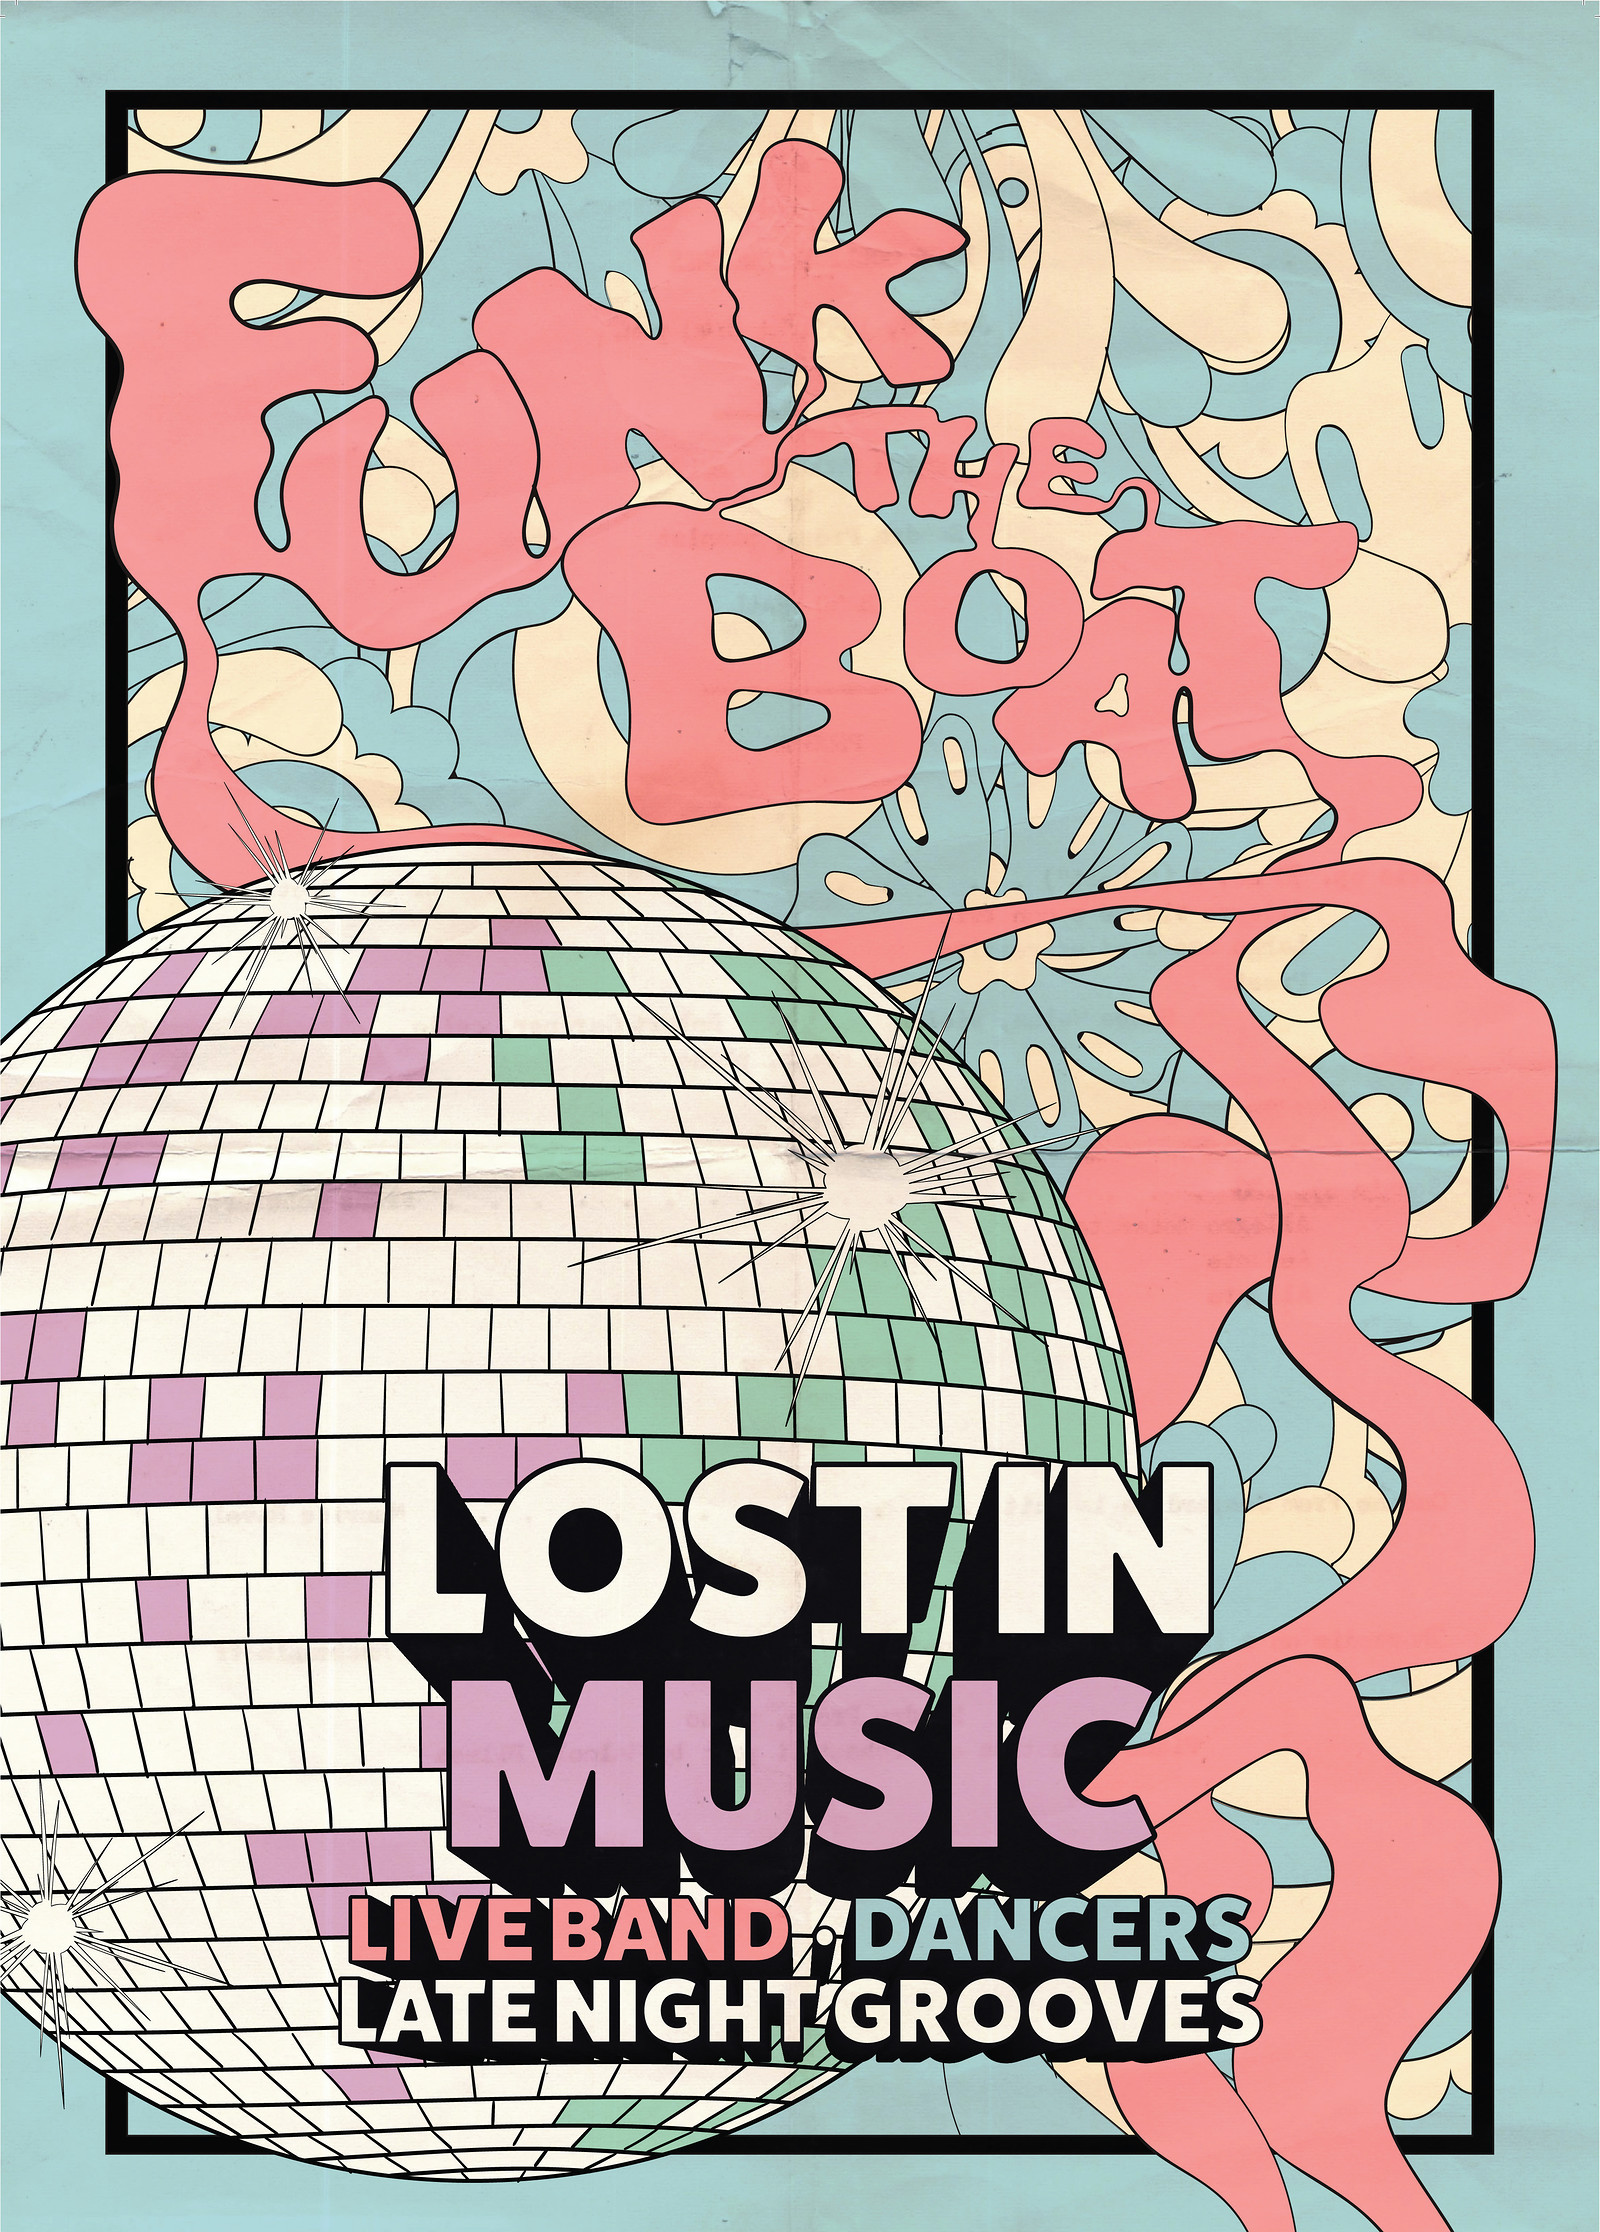 Funk The Boat Presents: Lost in Music at Thekla